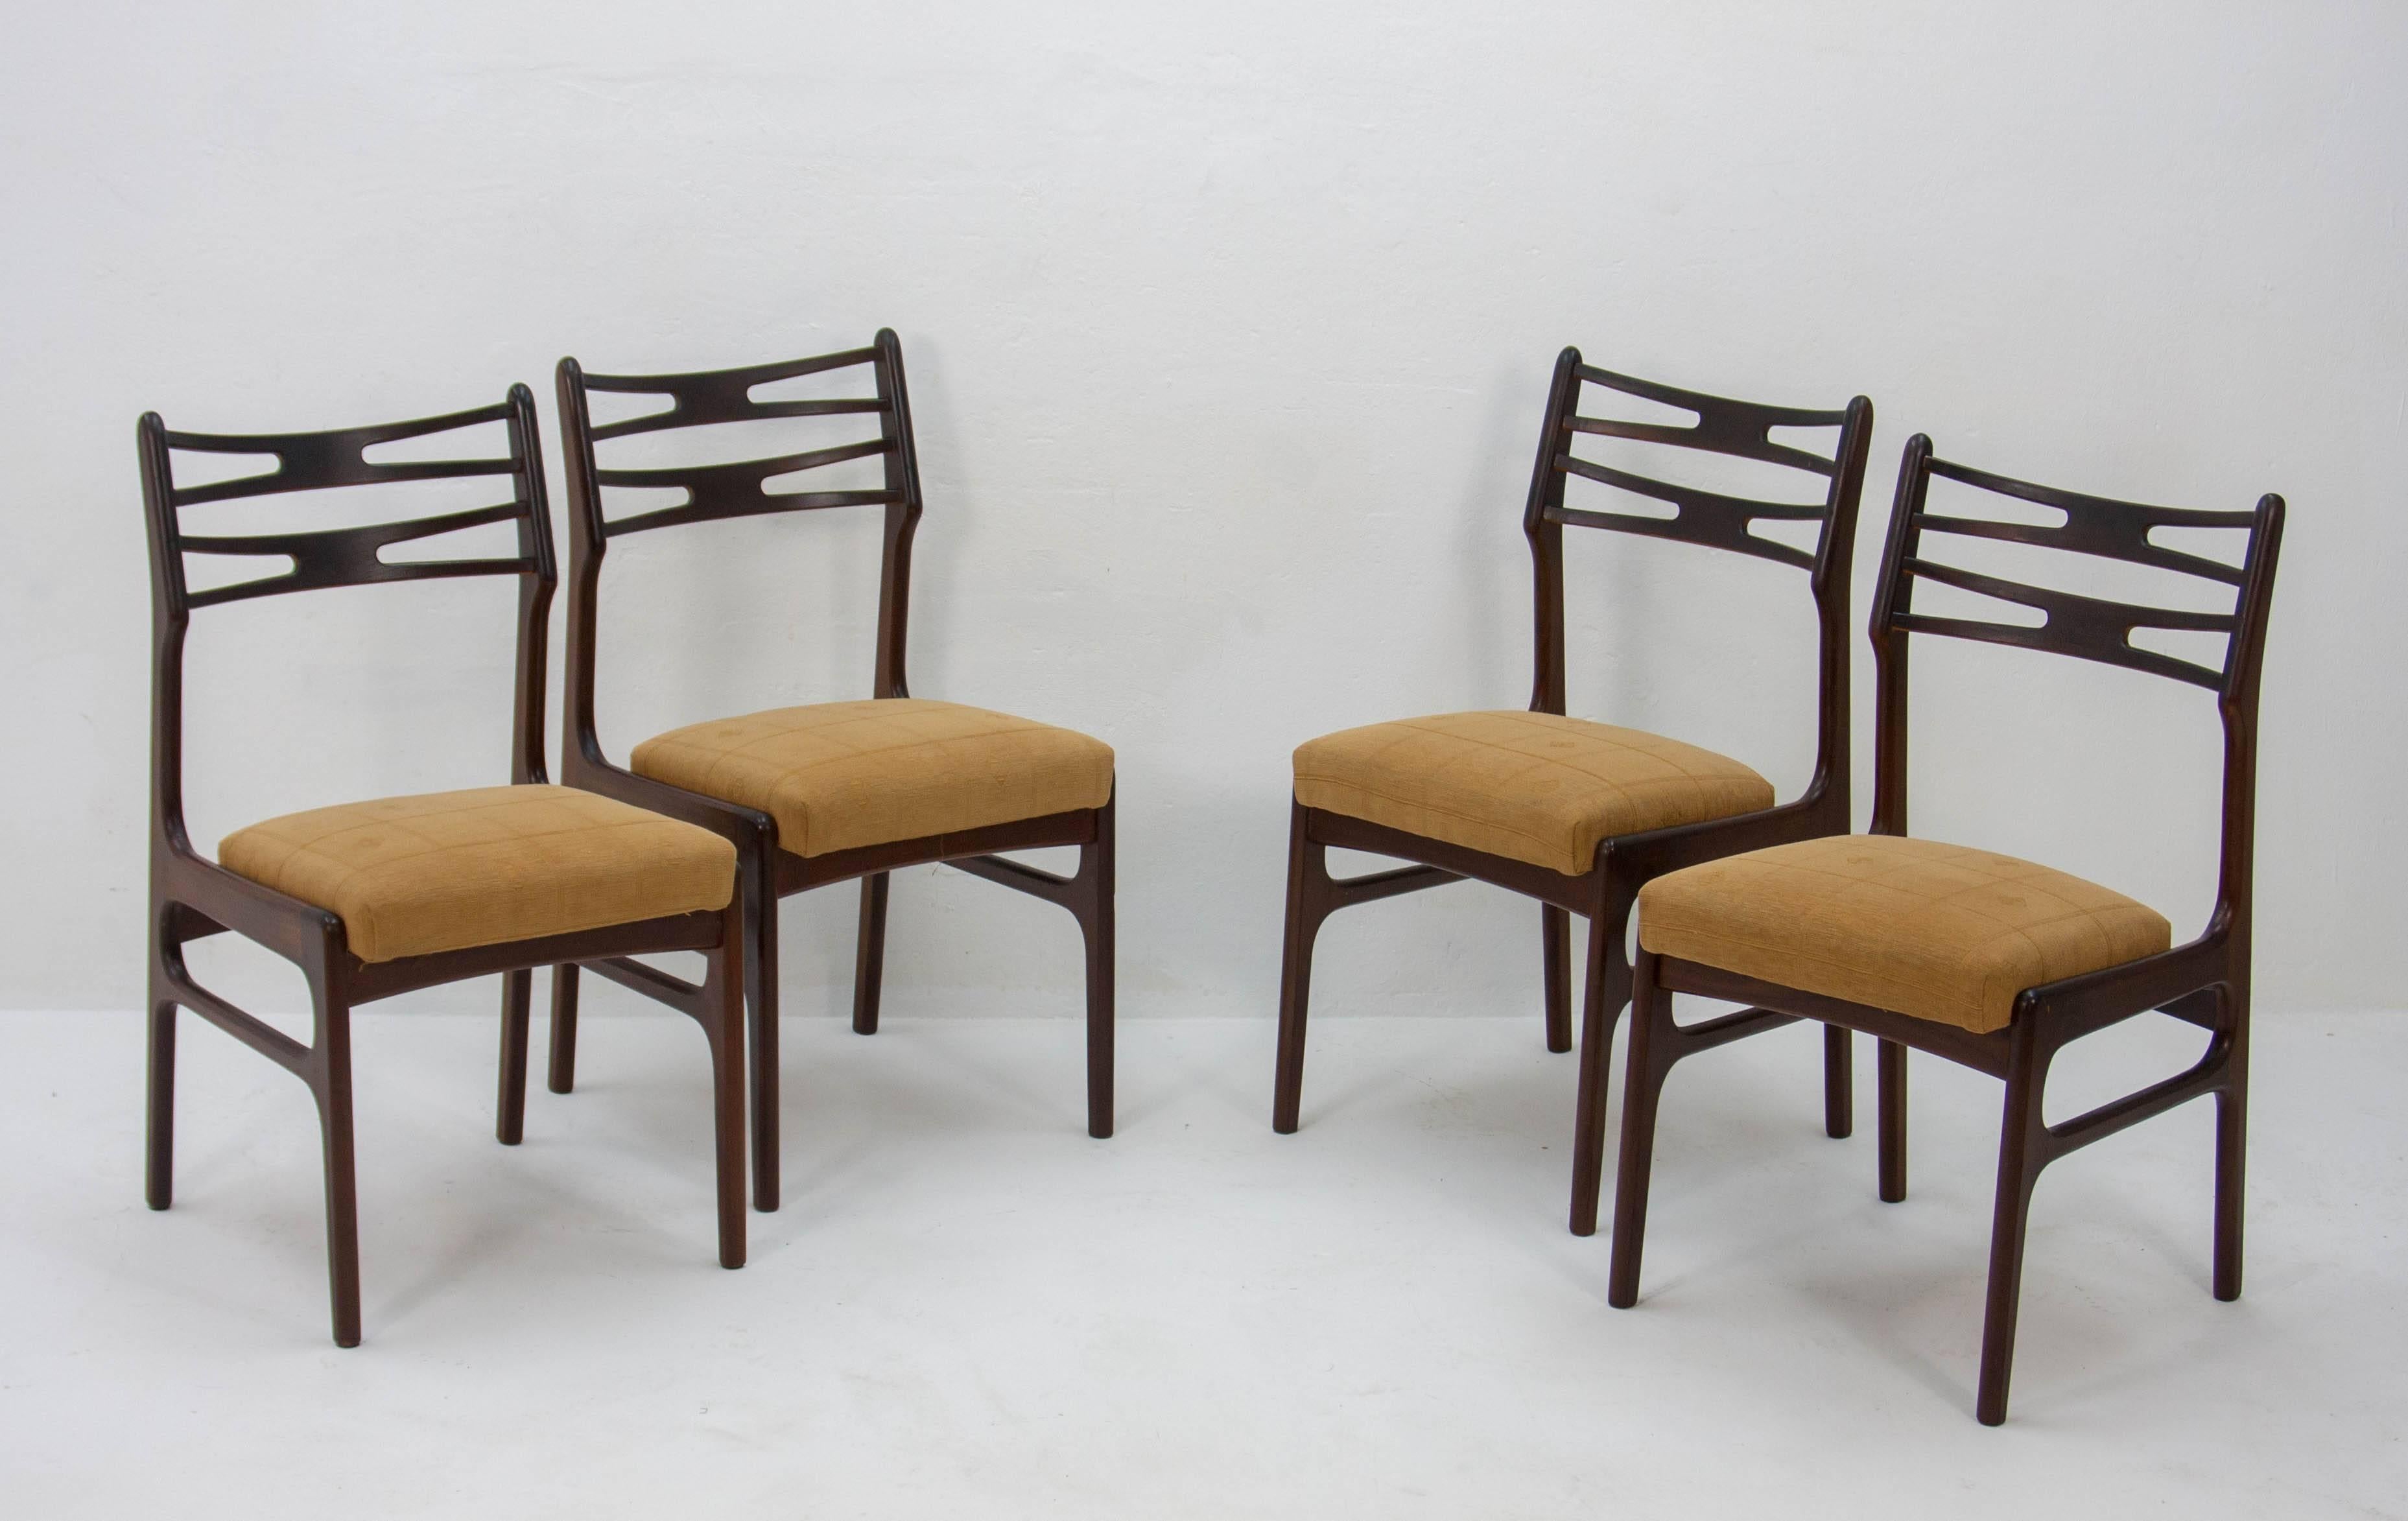 Four sophisticated model 101 dining chairs designed by Johannes Andersen for Vamo Sonderborg. Wonderfully crafted organically shaped teak frames.